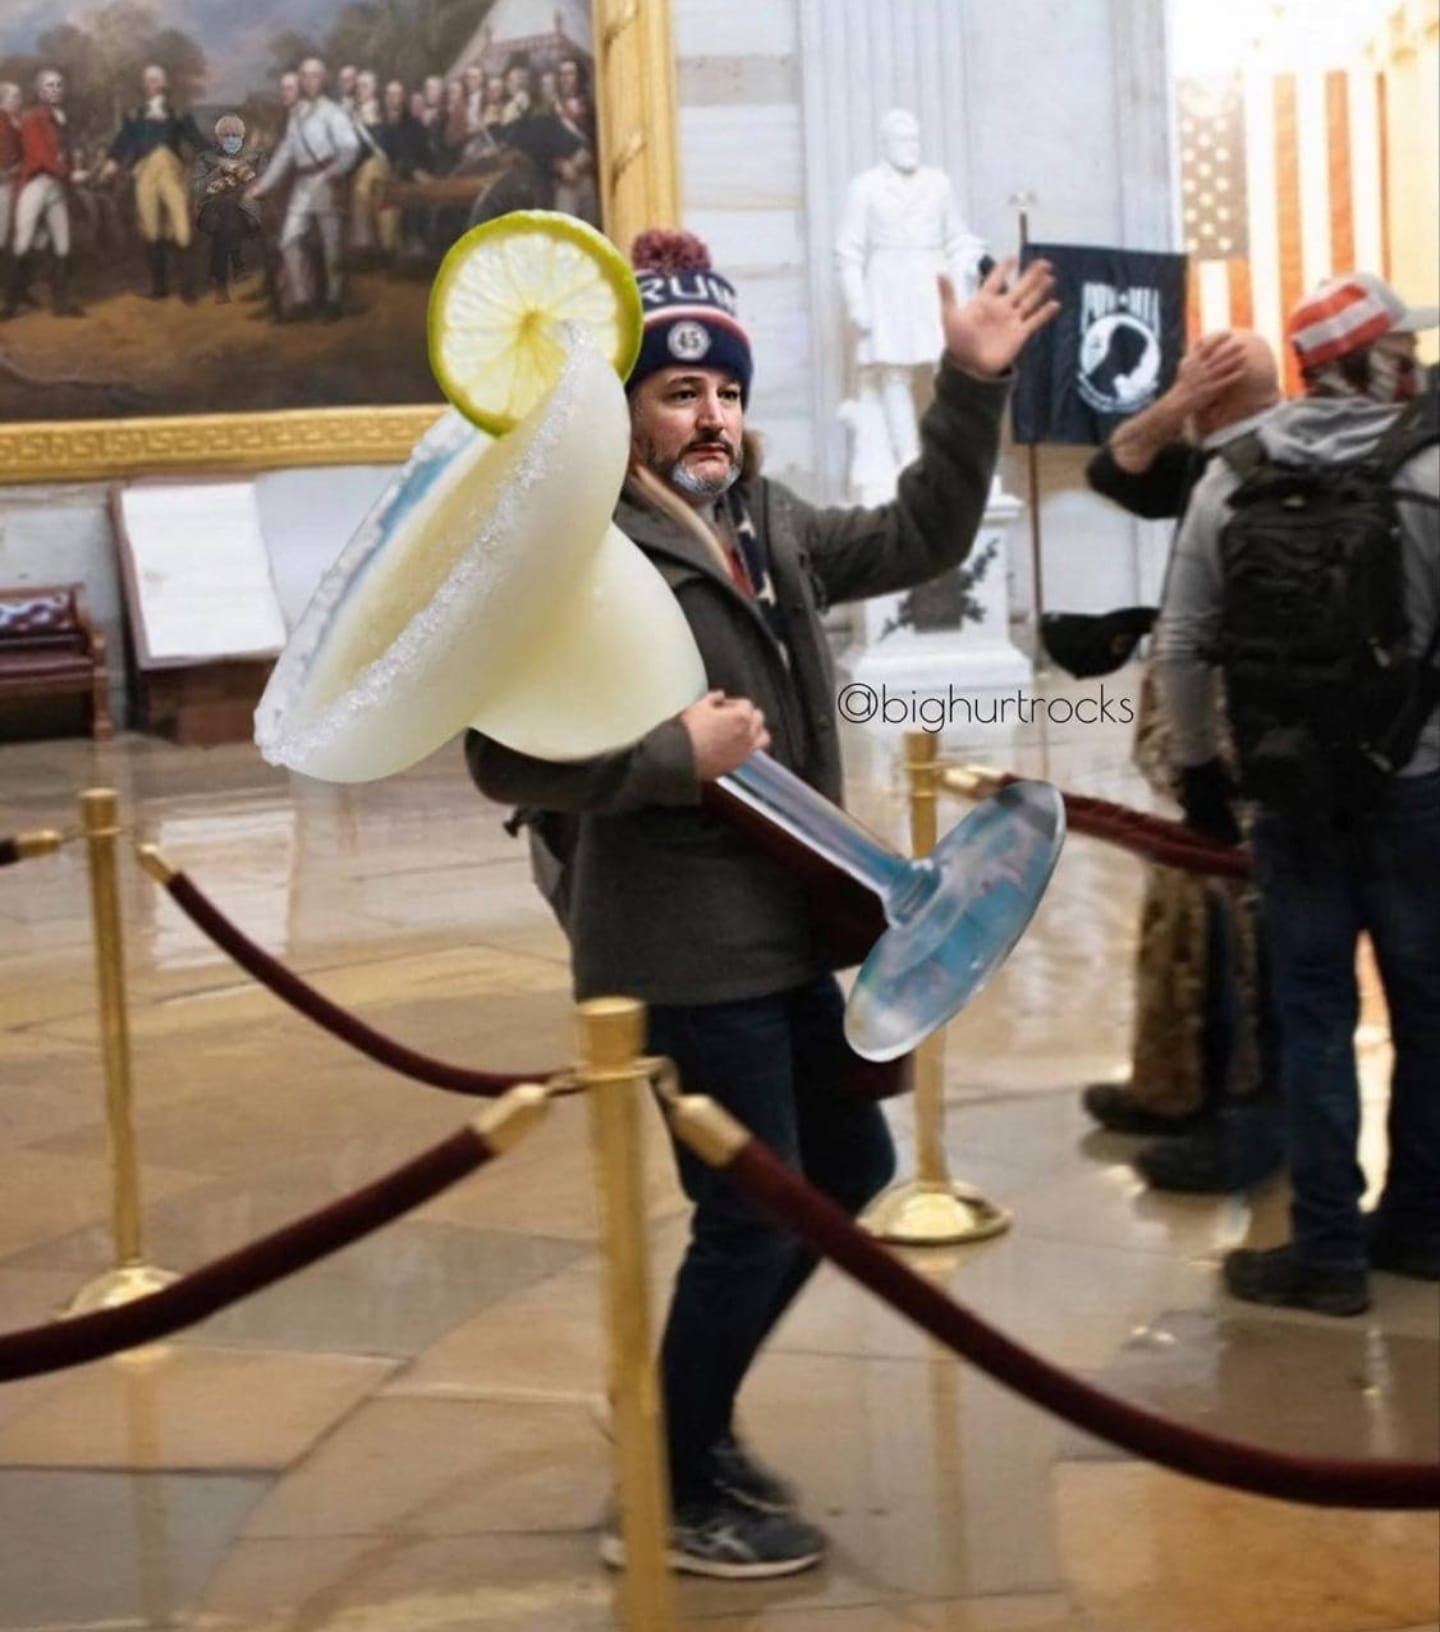 ted cruz on his way back from cancun, capitol siege